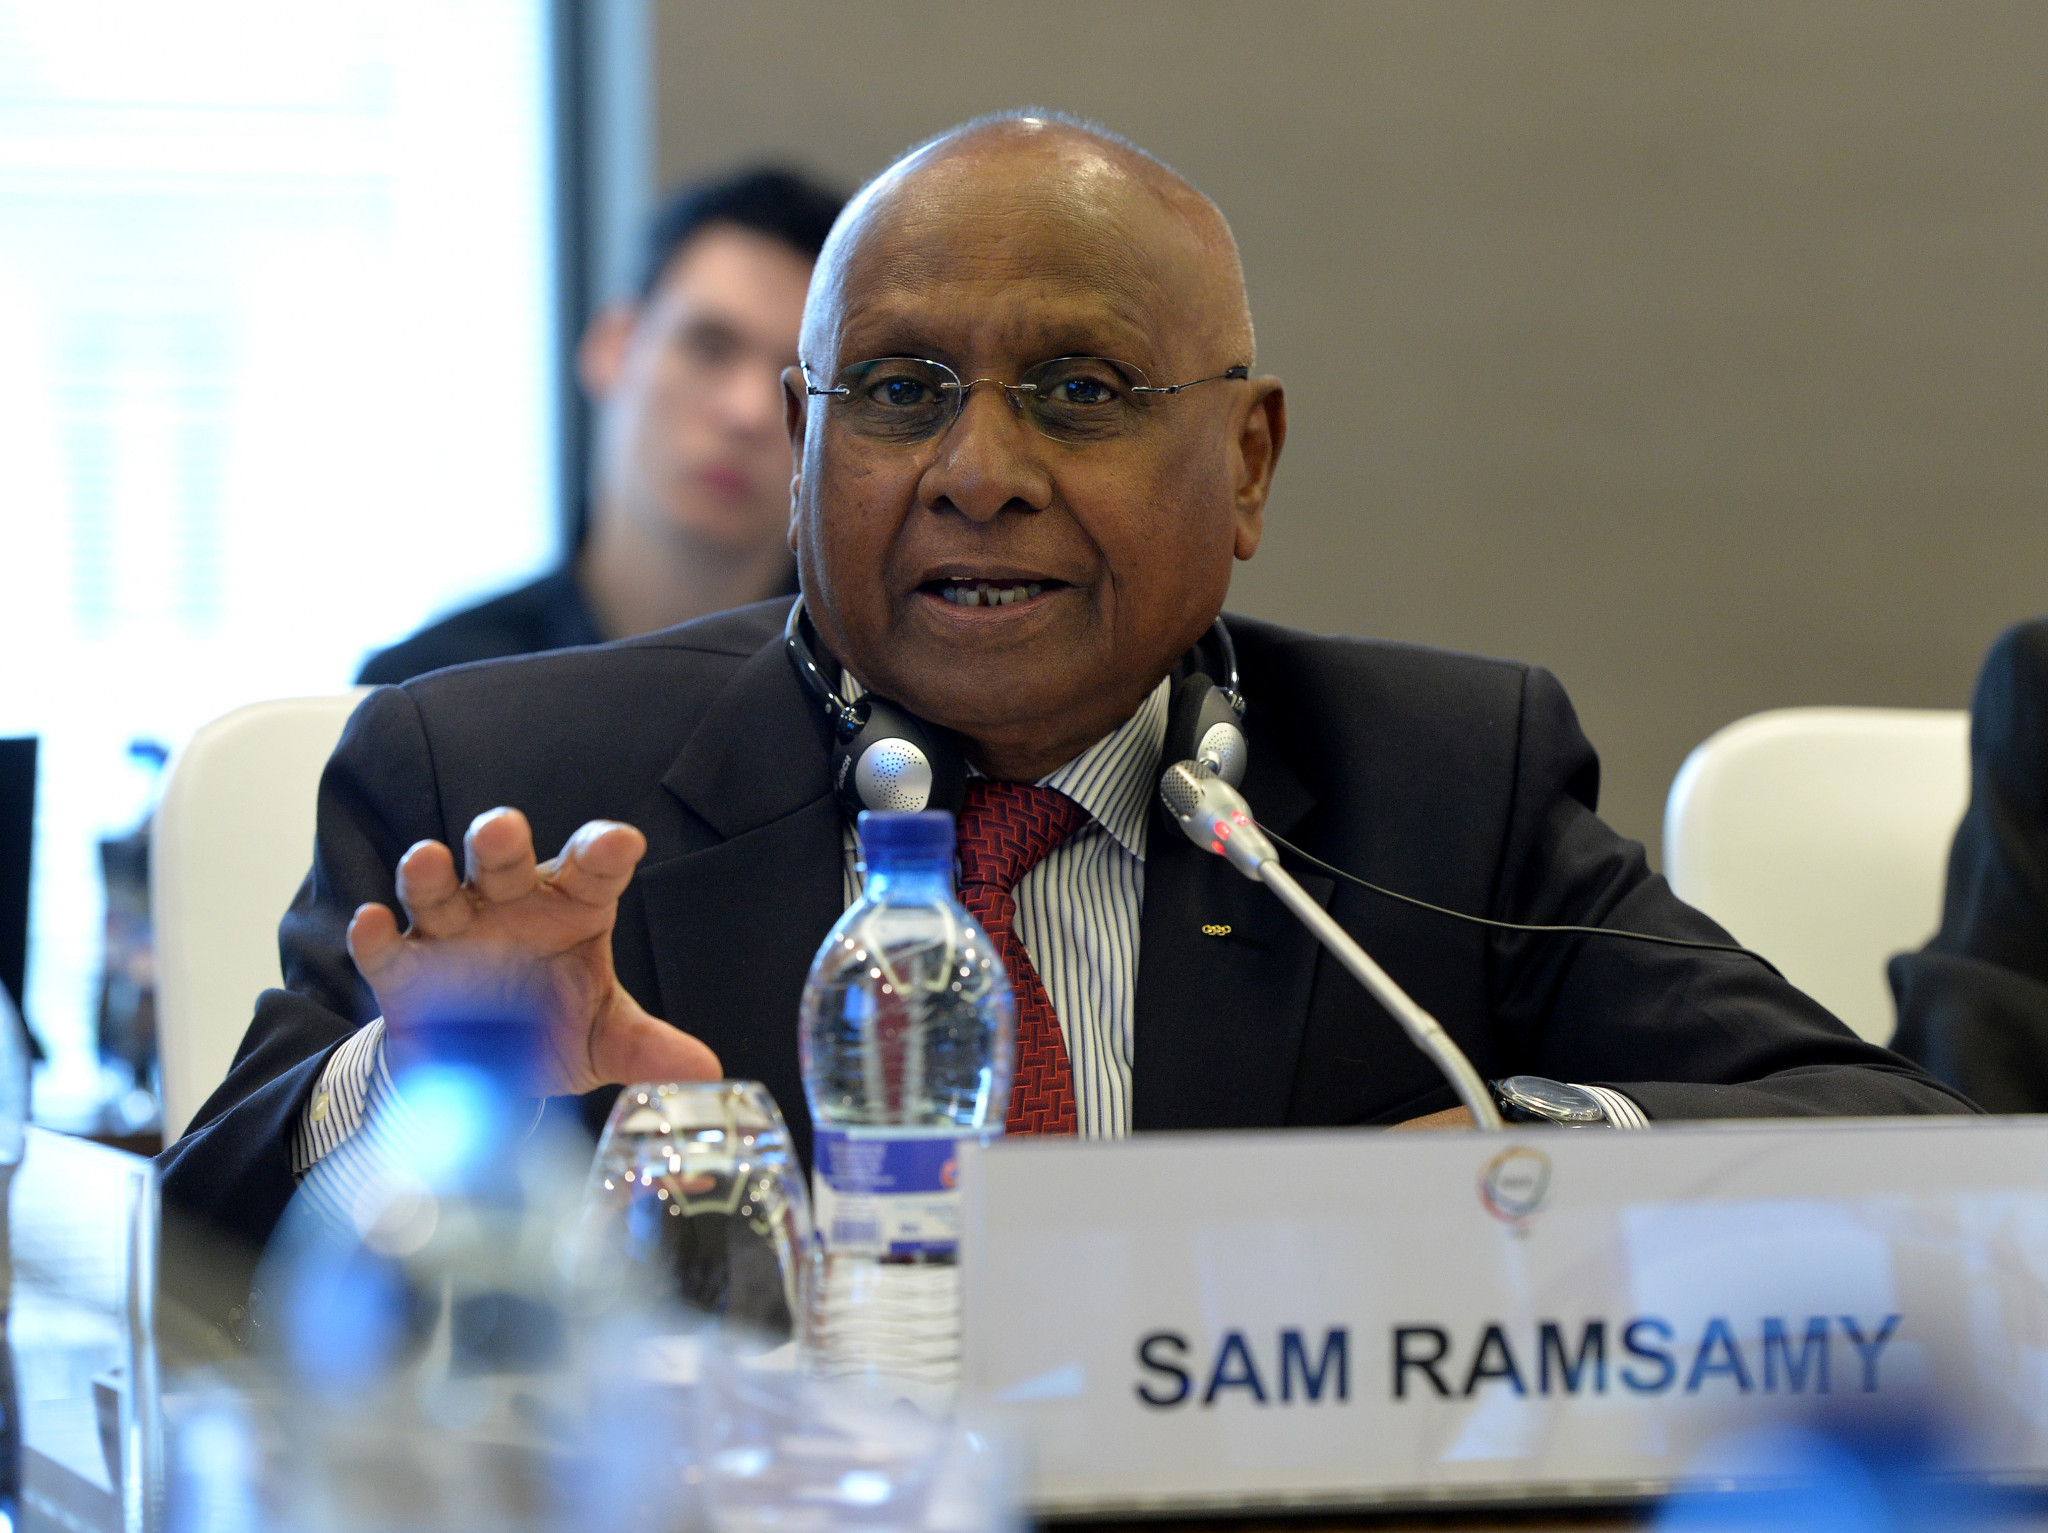 Honorary IOC member Sam Ramsamy believes there has been an "unconscious bias" against Russia during discussions over their compliance with the WADA Code ©Getty Images